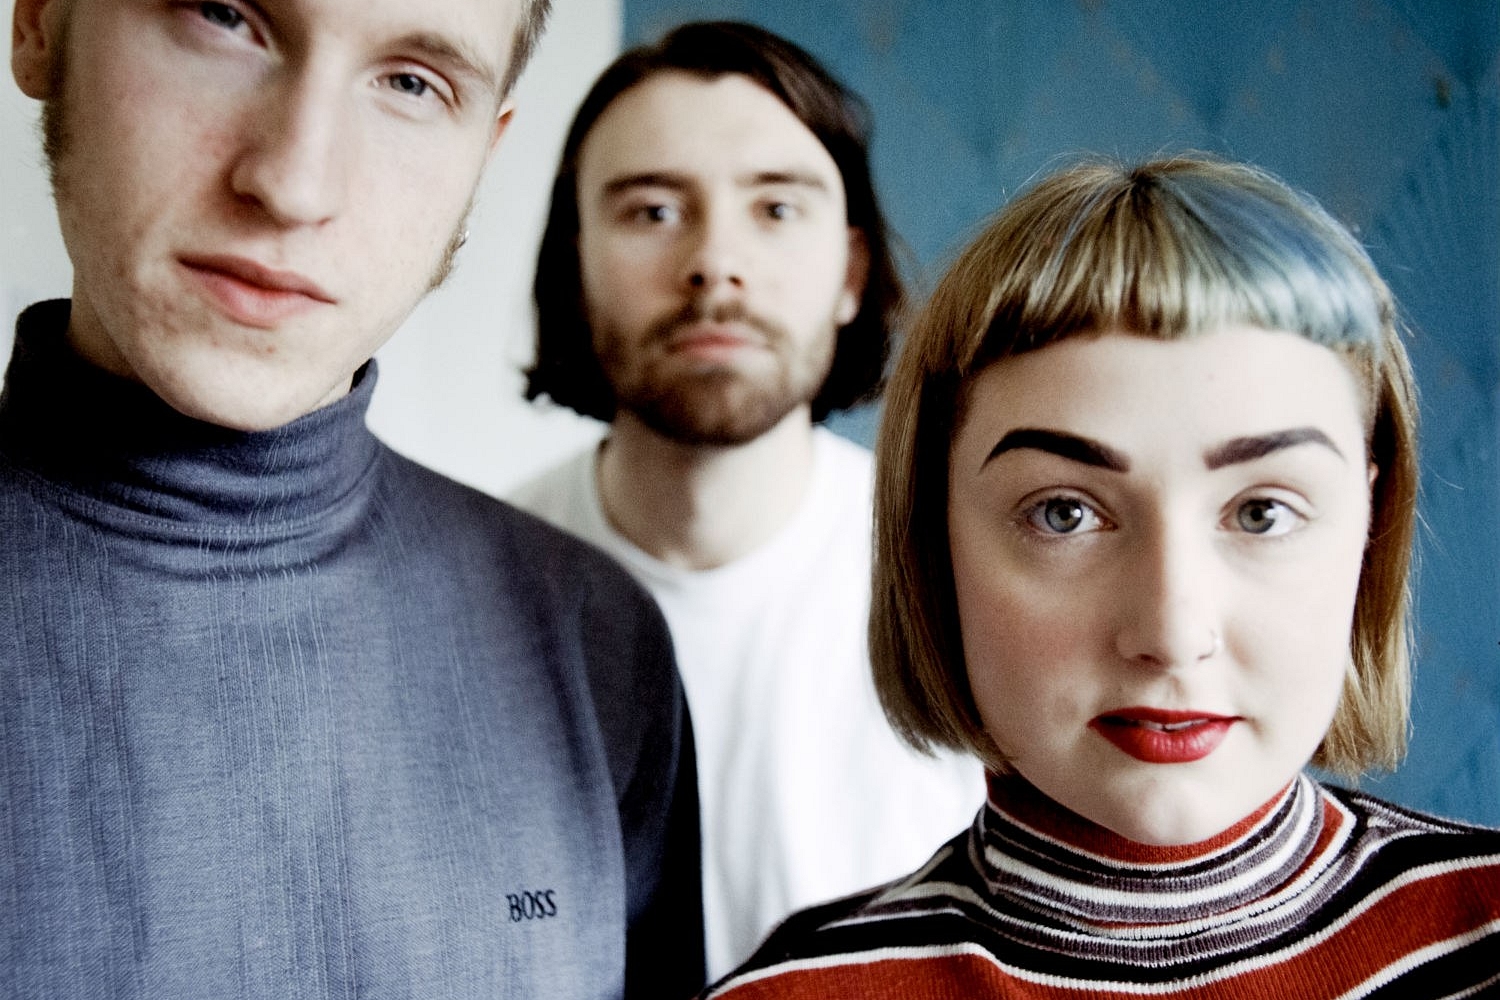 Kagoule - Magnified